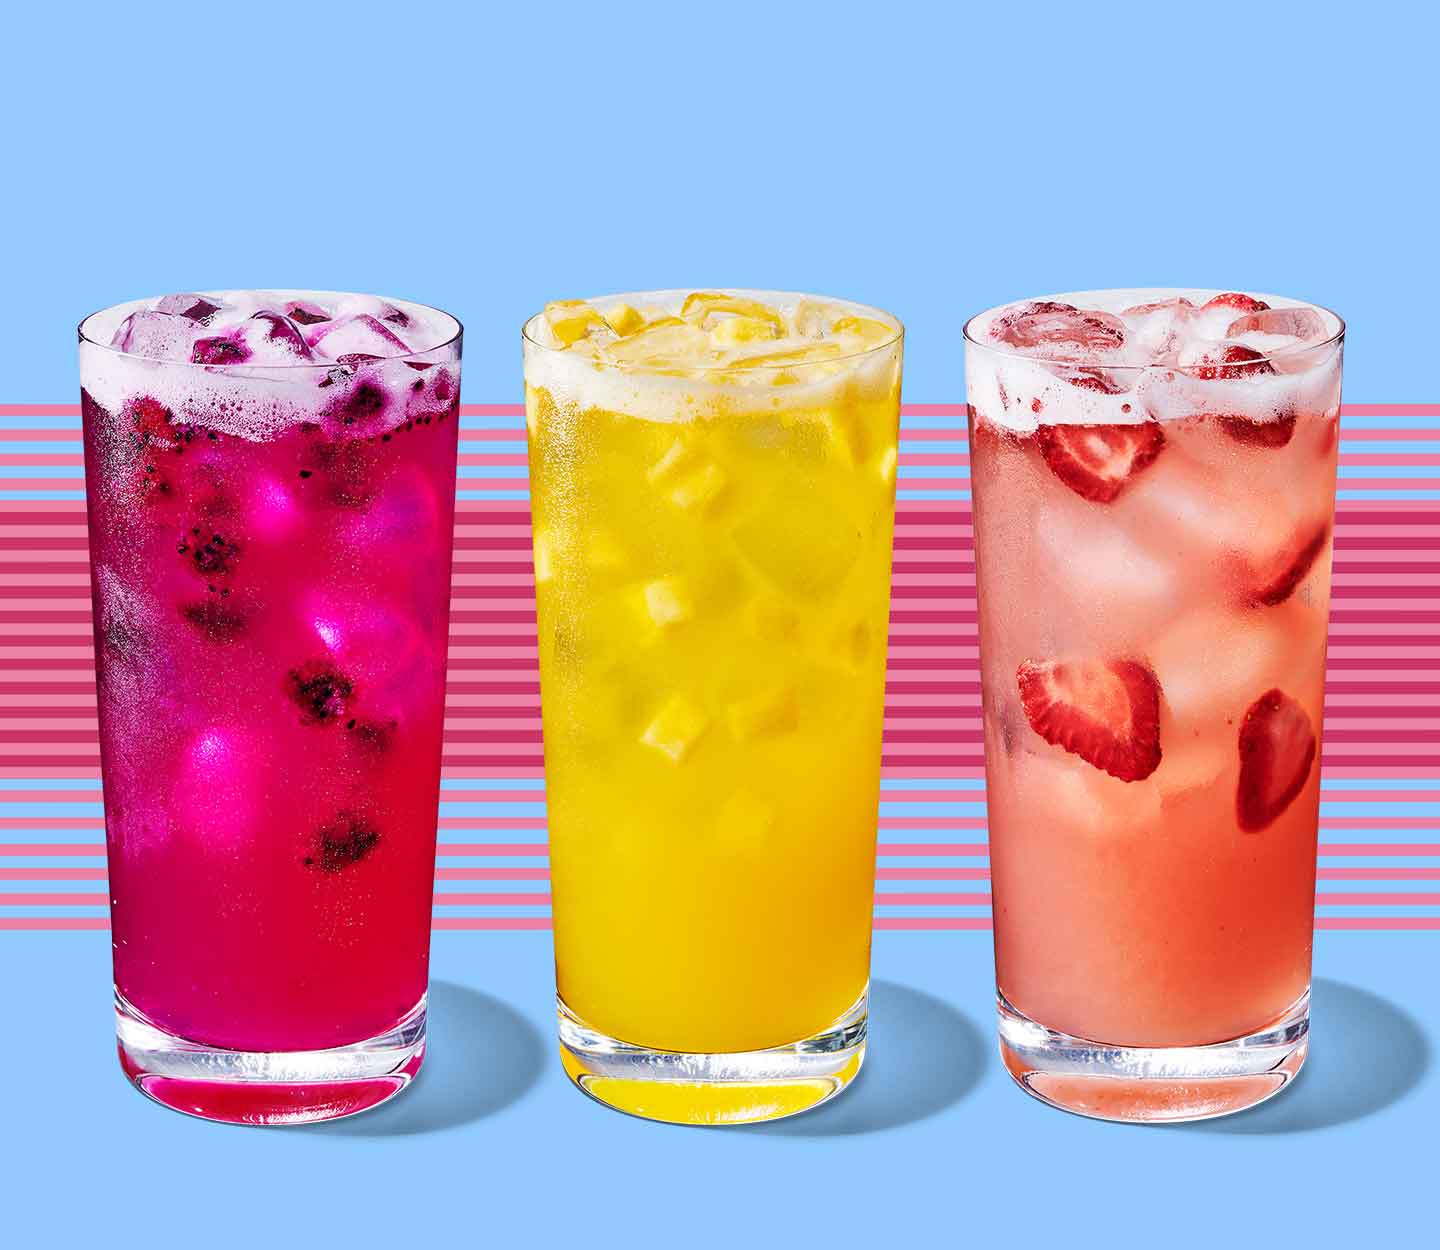 Three tall glasses sit side by side and are filled with fruity drinks that show fruit inclusions.